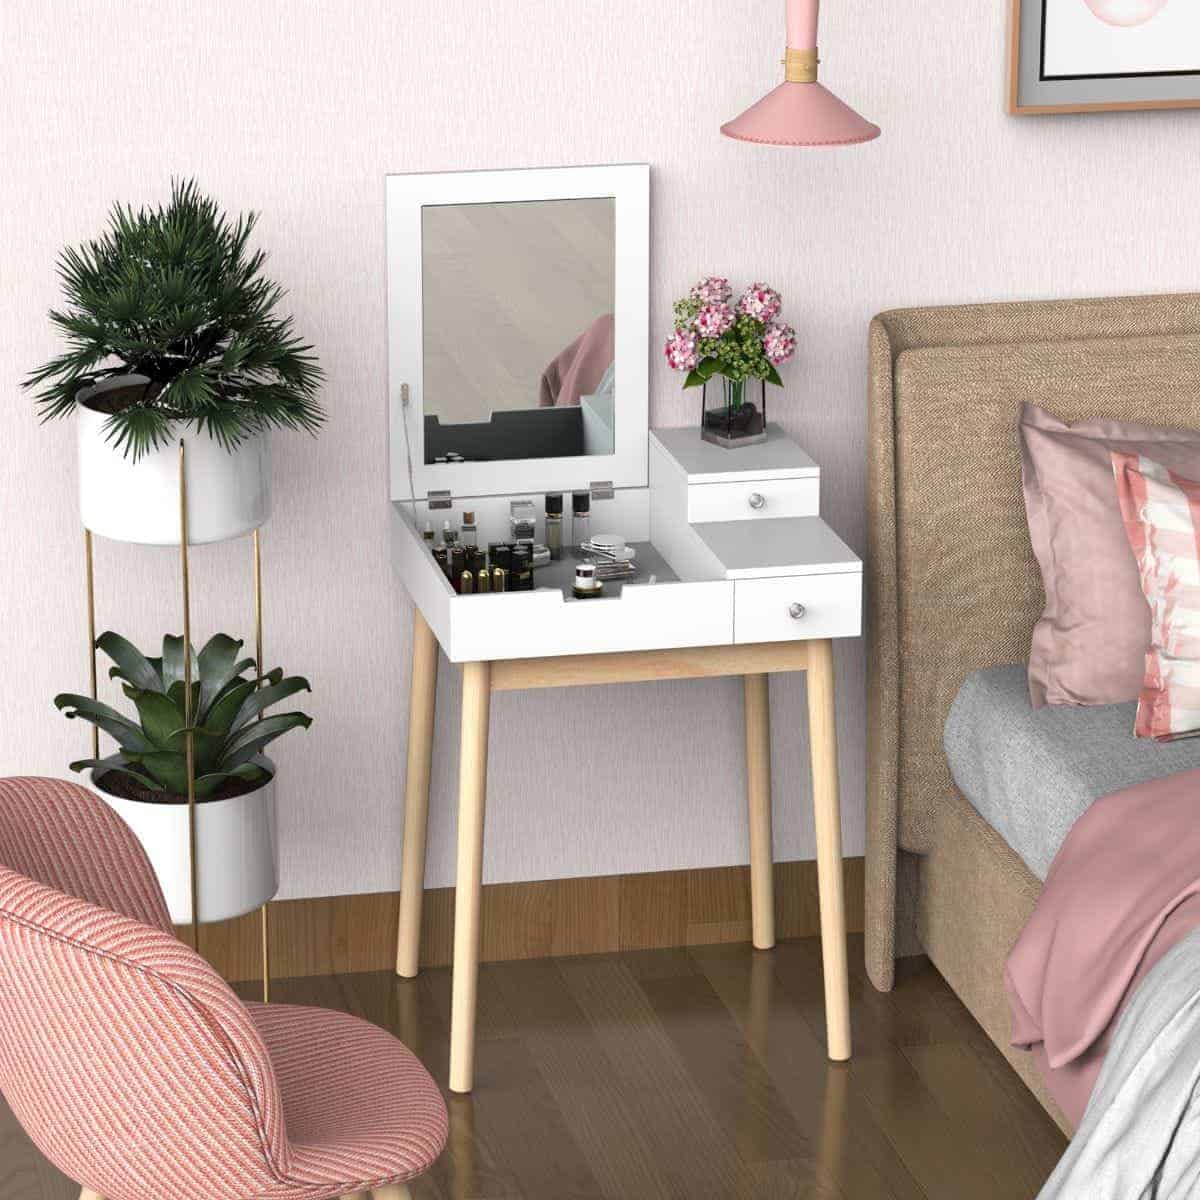 A really cute and compact dressing table design with a rectangular mirror and little storage space, kept in a pink-themed bedroom.